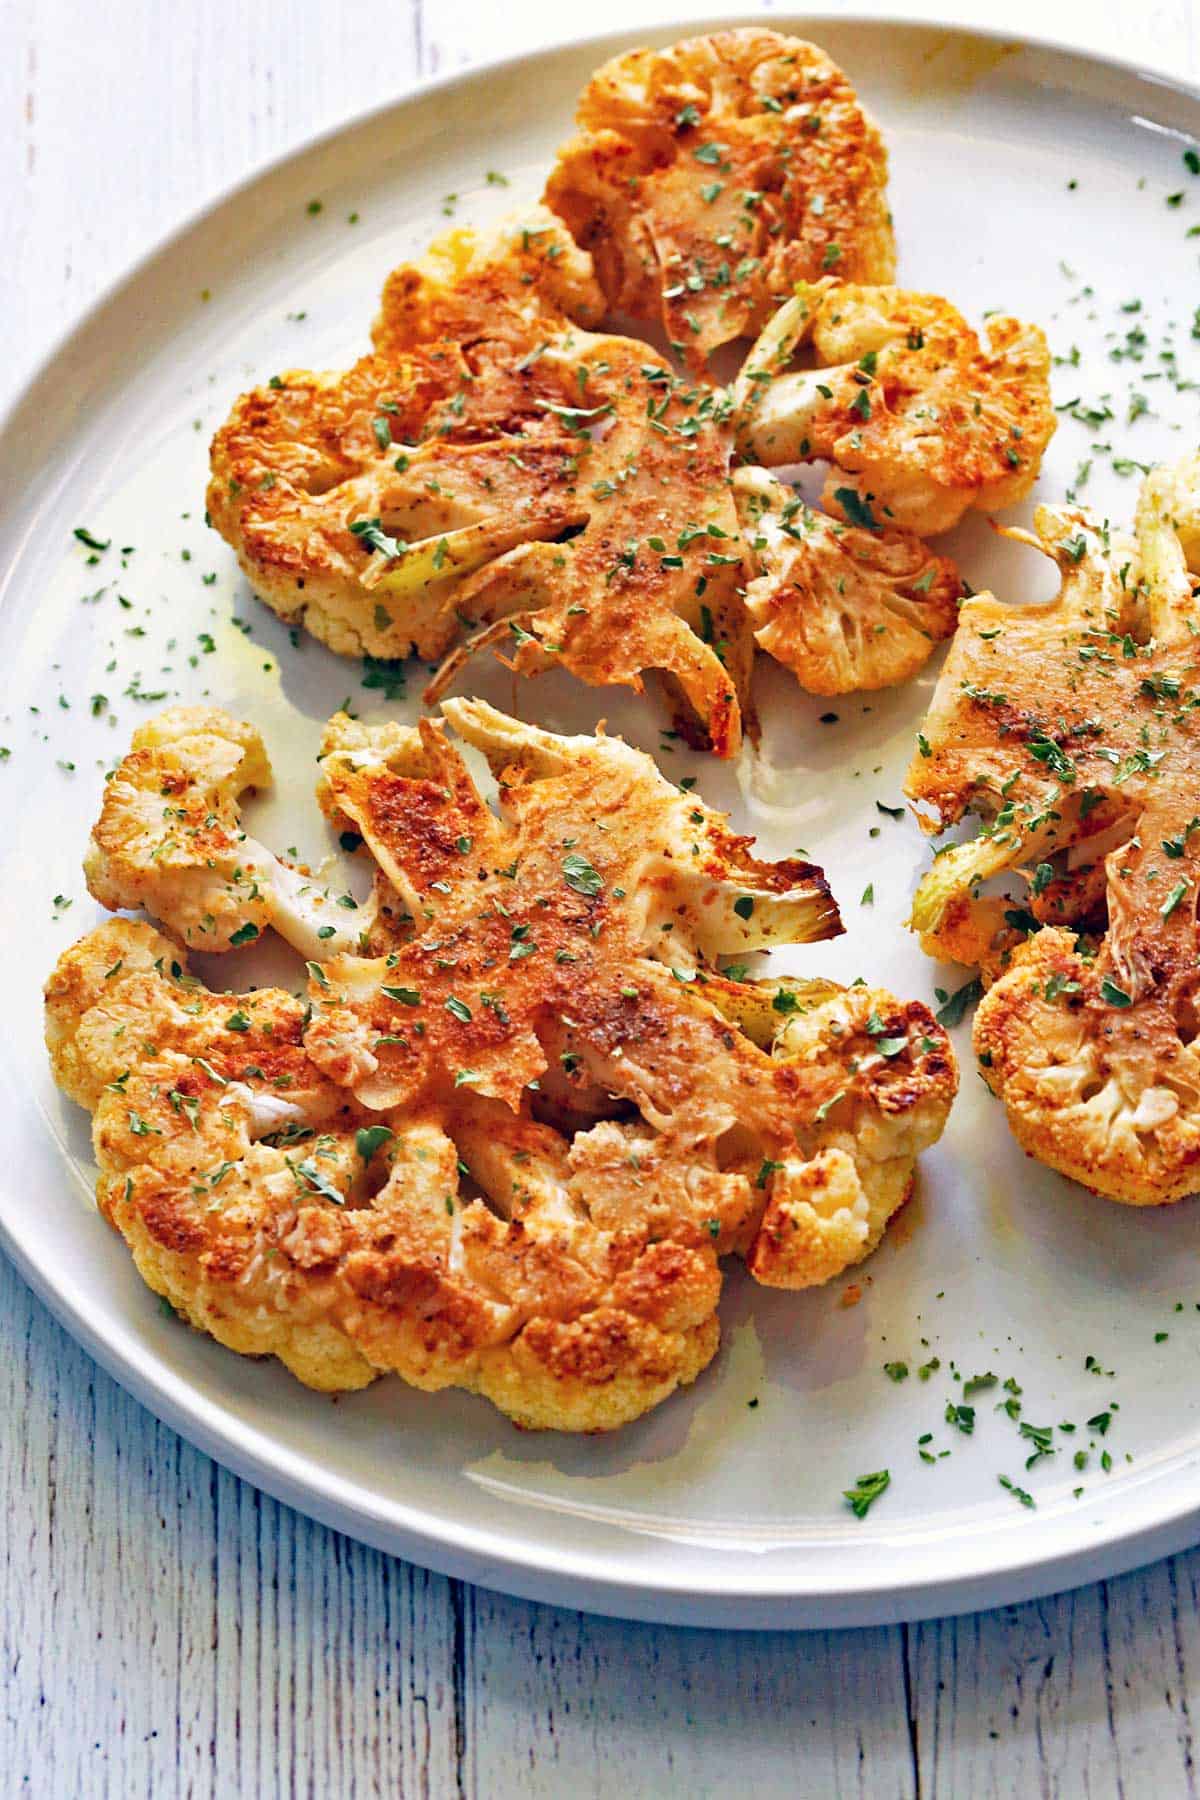 Cauliflower steaks are served on a white plate.